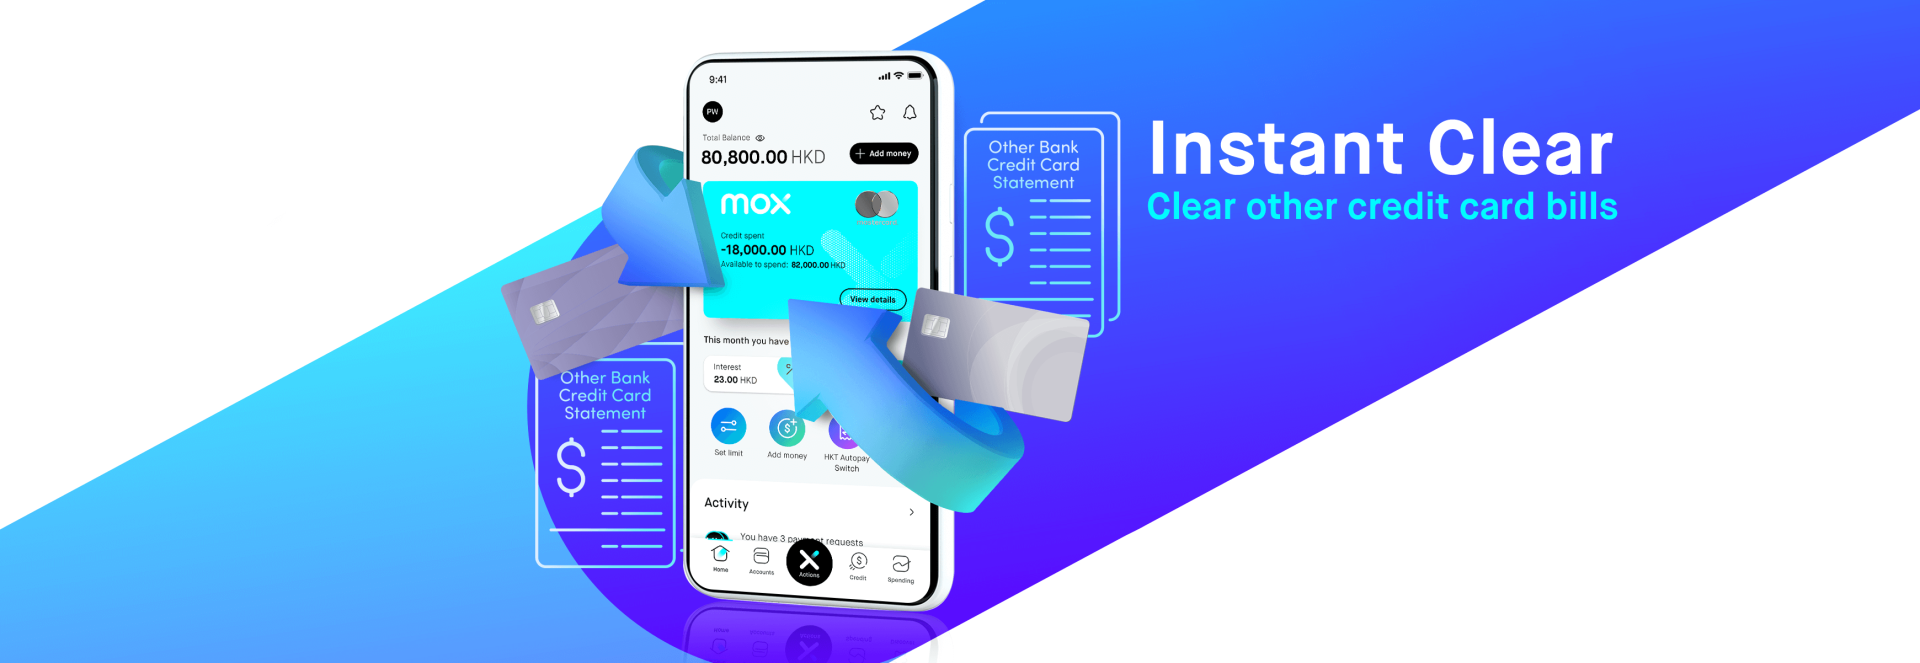 Mox Launches 'Instant Clear' to Offer Smarter Control Over Other Credit Card Bills During the Pandemic